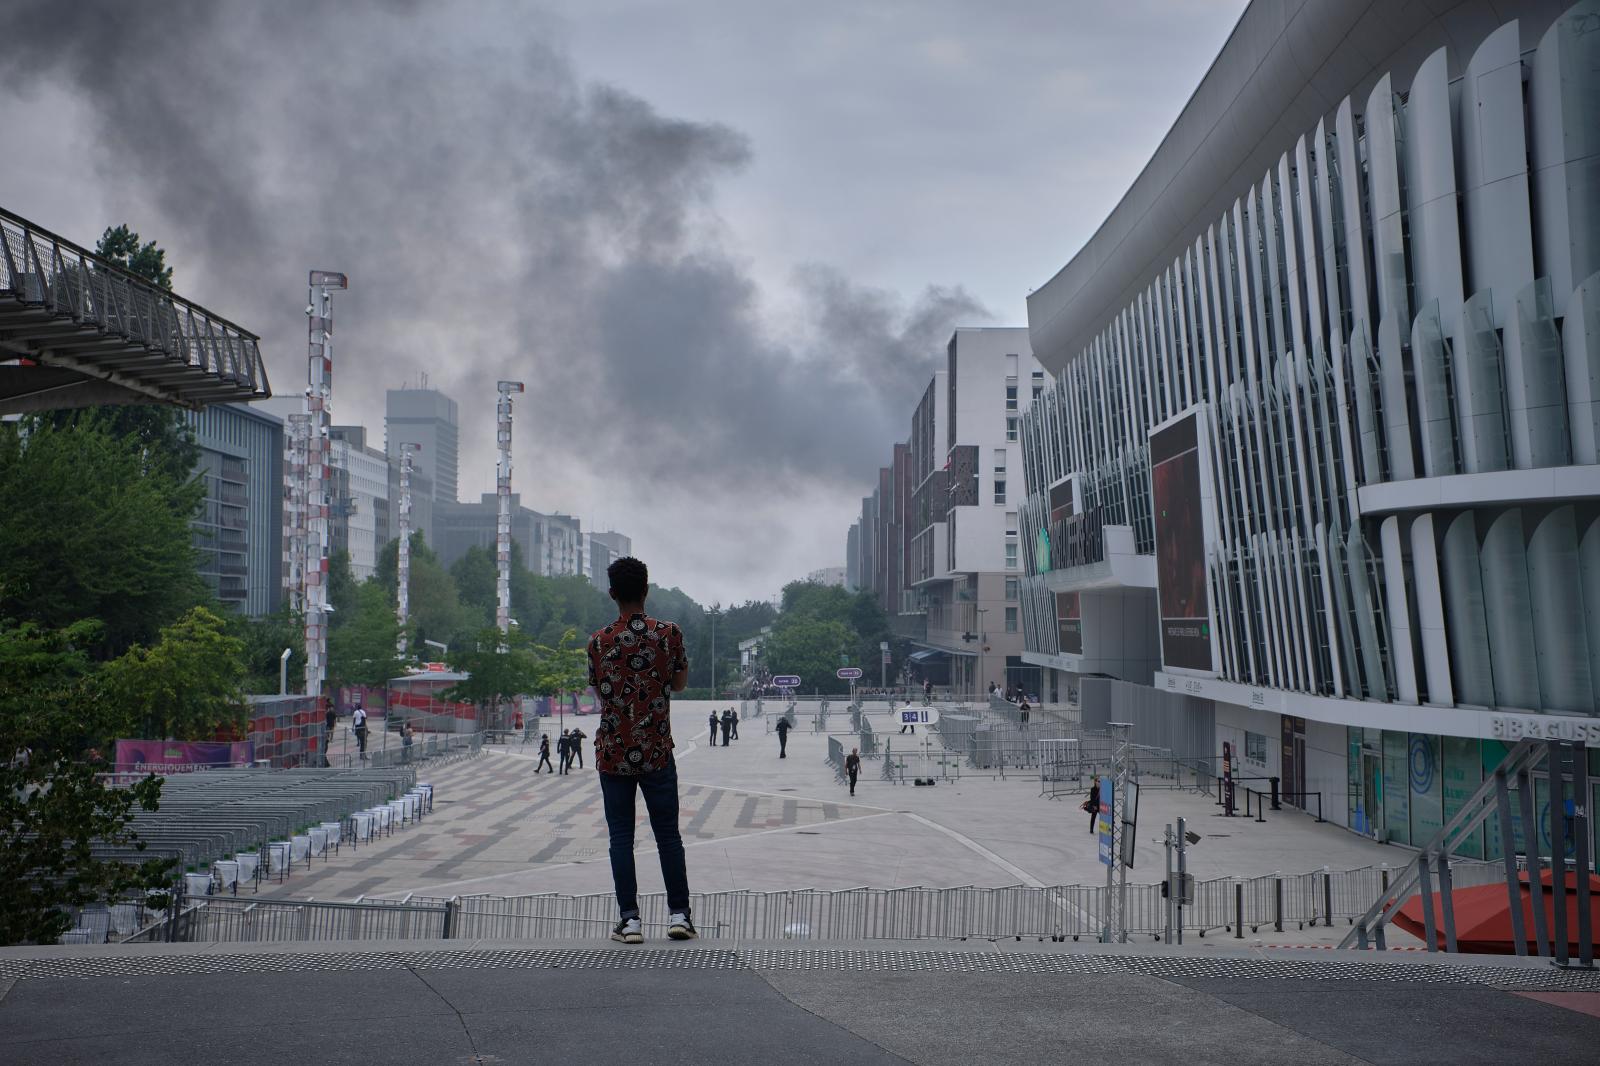 Fires rage in Nanterre after march for justice | Buy this image